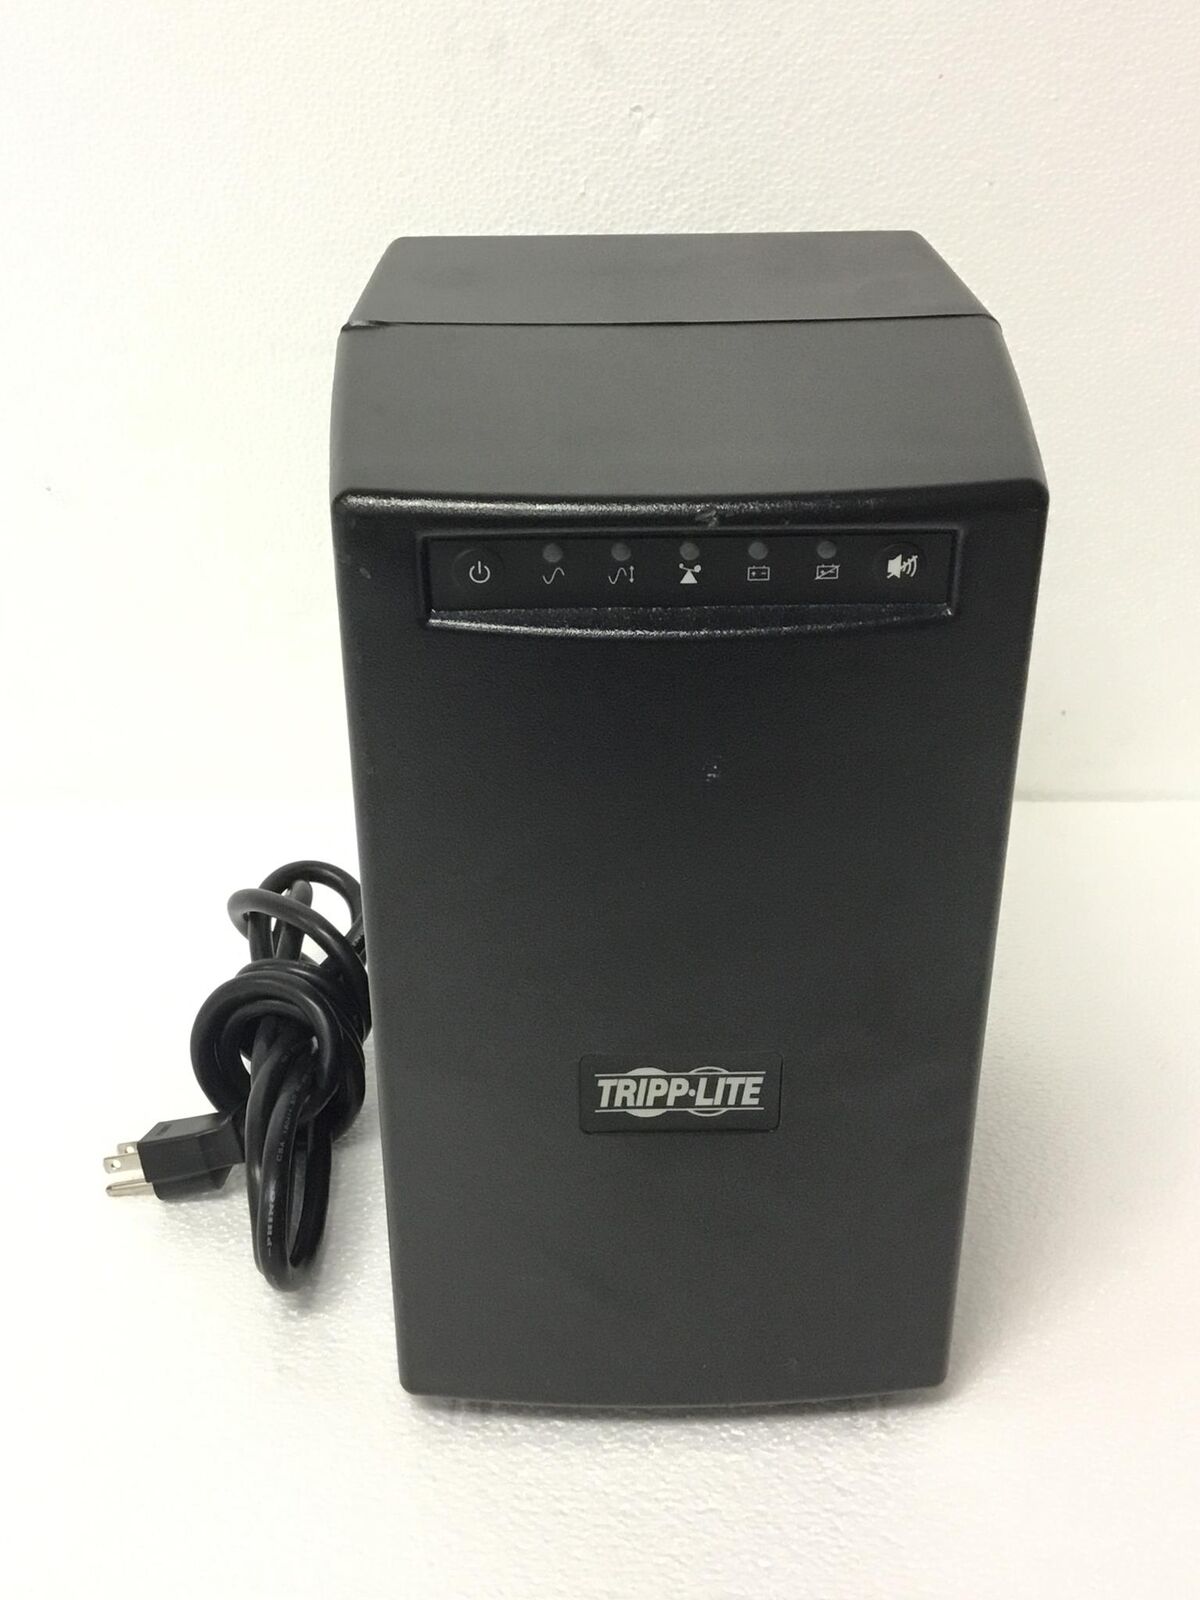 TRIPP LITE Smart1500 980W 6 Outlets Uninterruptible Power Supply w/Cables,WORKS